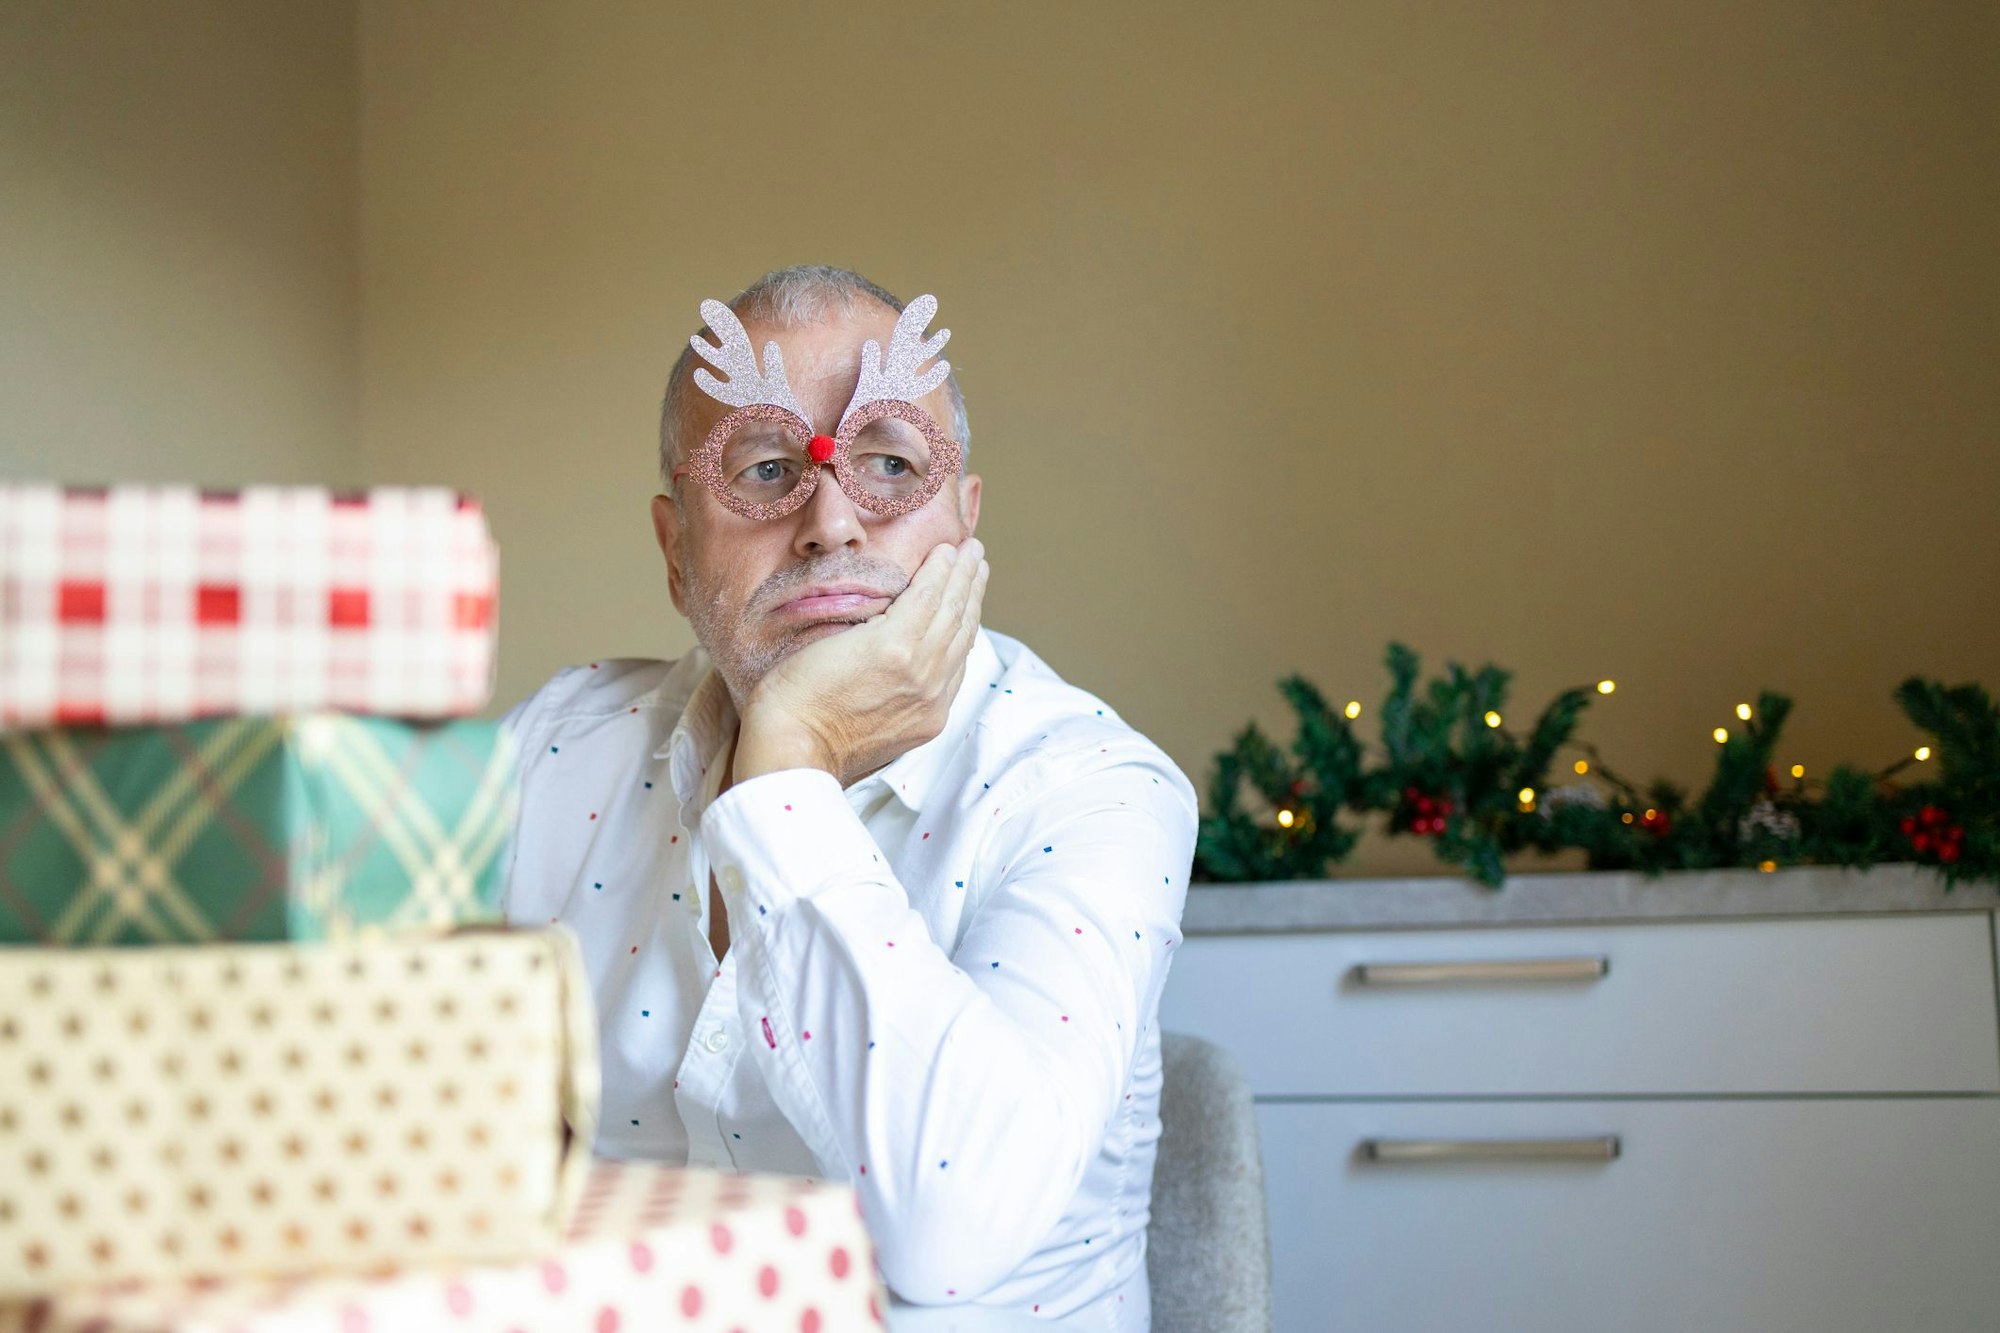 Upset aged man with grey hairs sitting near Christmas presents